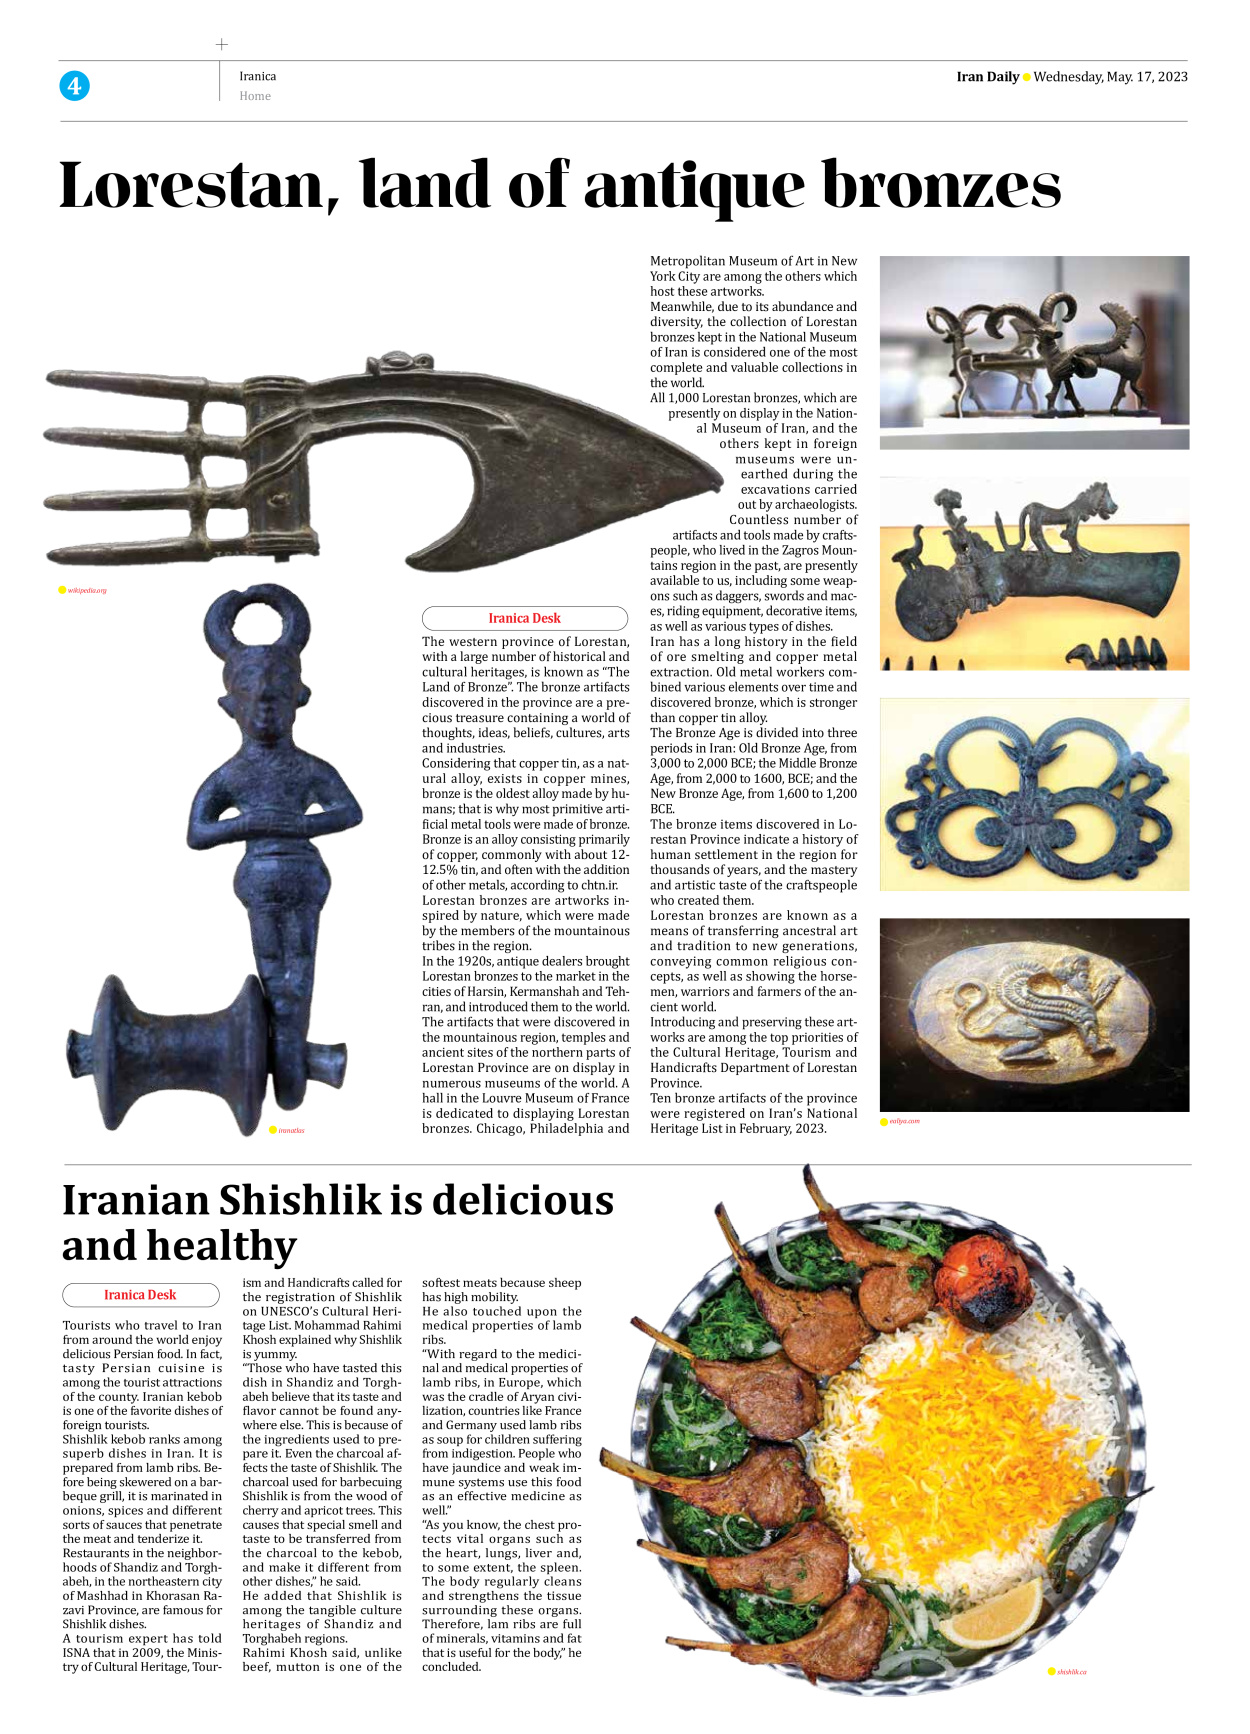 Iran Daily - Number Seven Thousand Two Hundred and Ninety Three - 17 May 2023 - Page 4